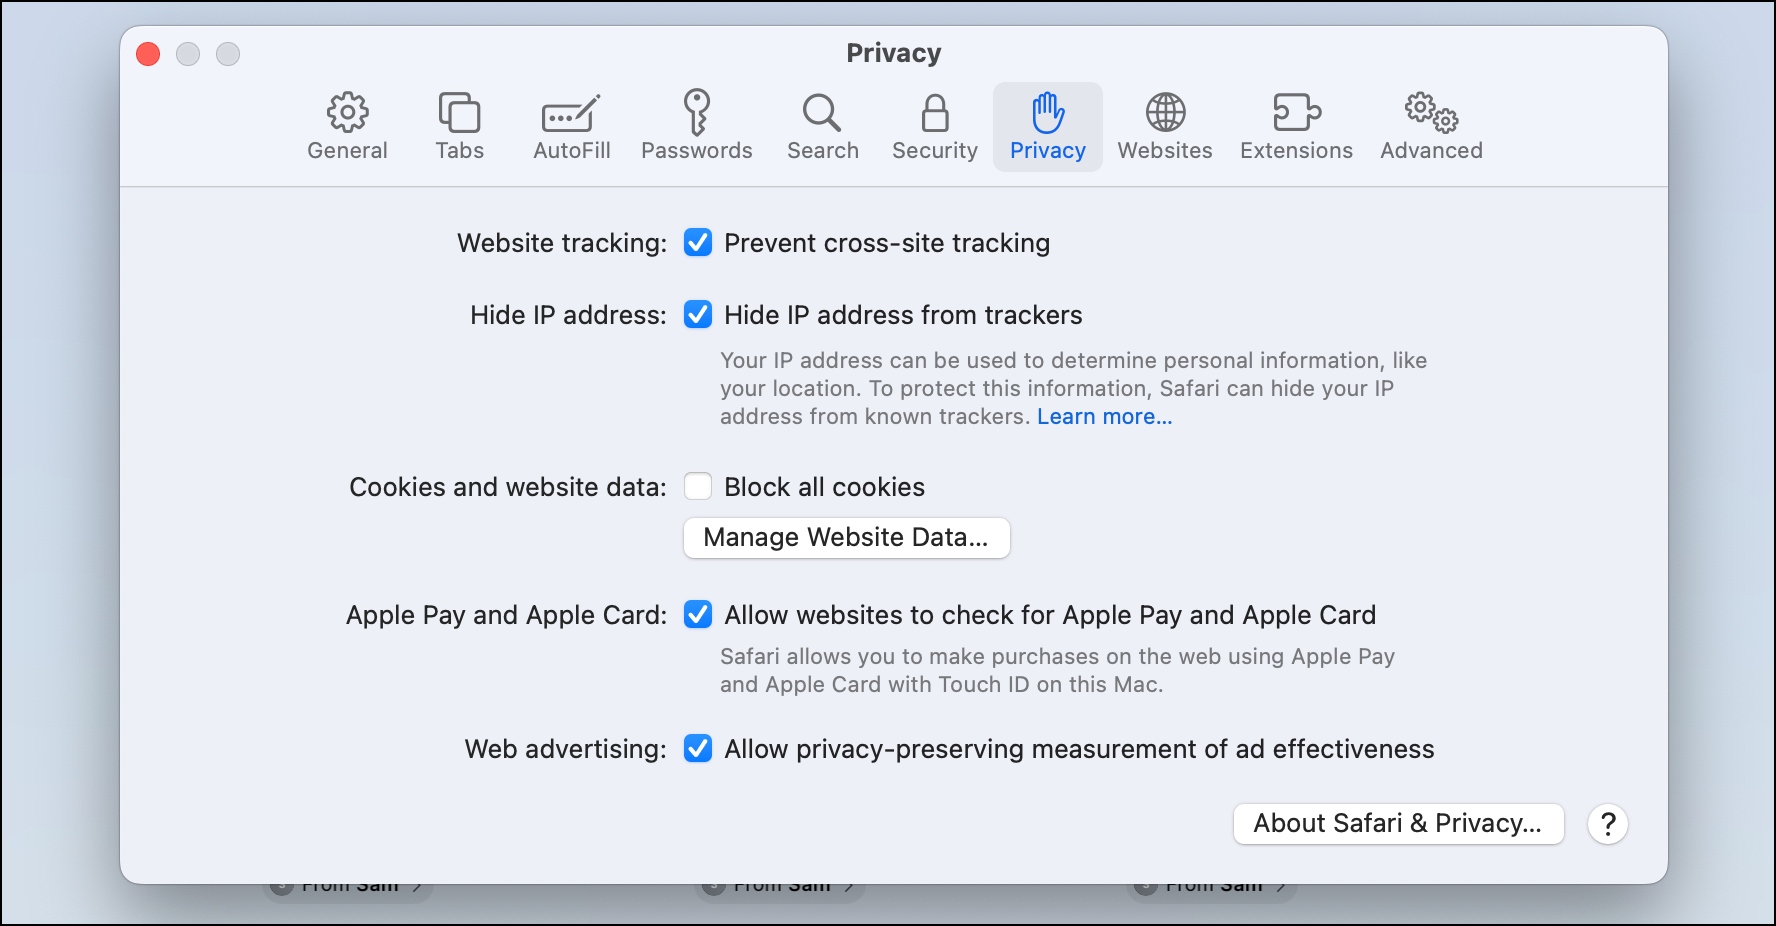 How to Prevent Cross-Site Tracking in Safari on Mac?